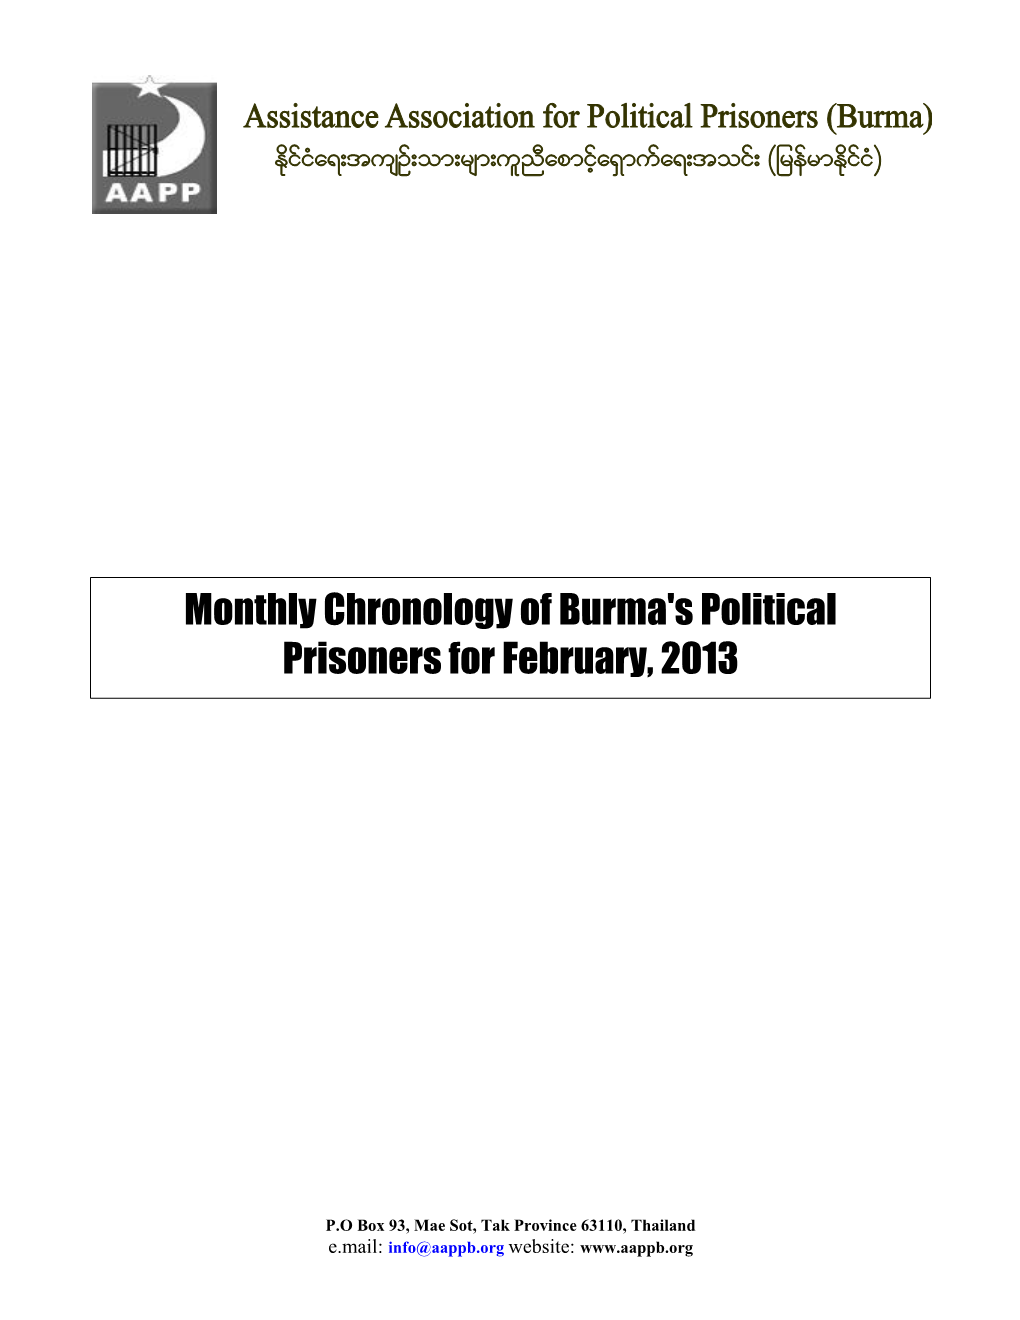 Monthly Chronology of Burma's Political Prisoners for February, 2013